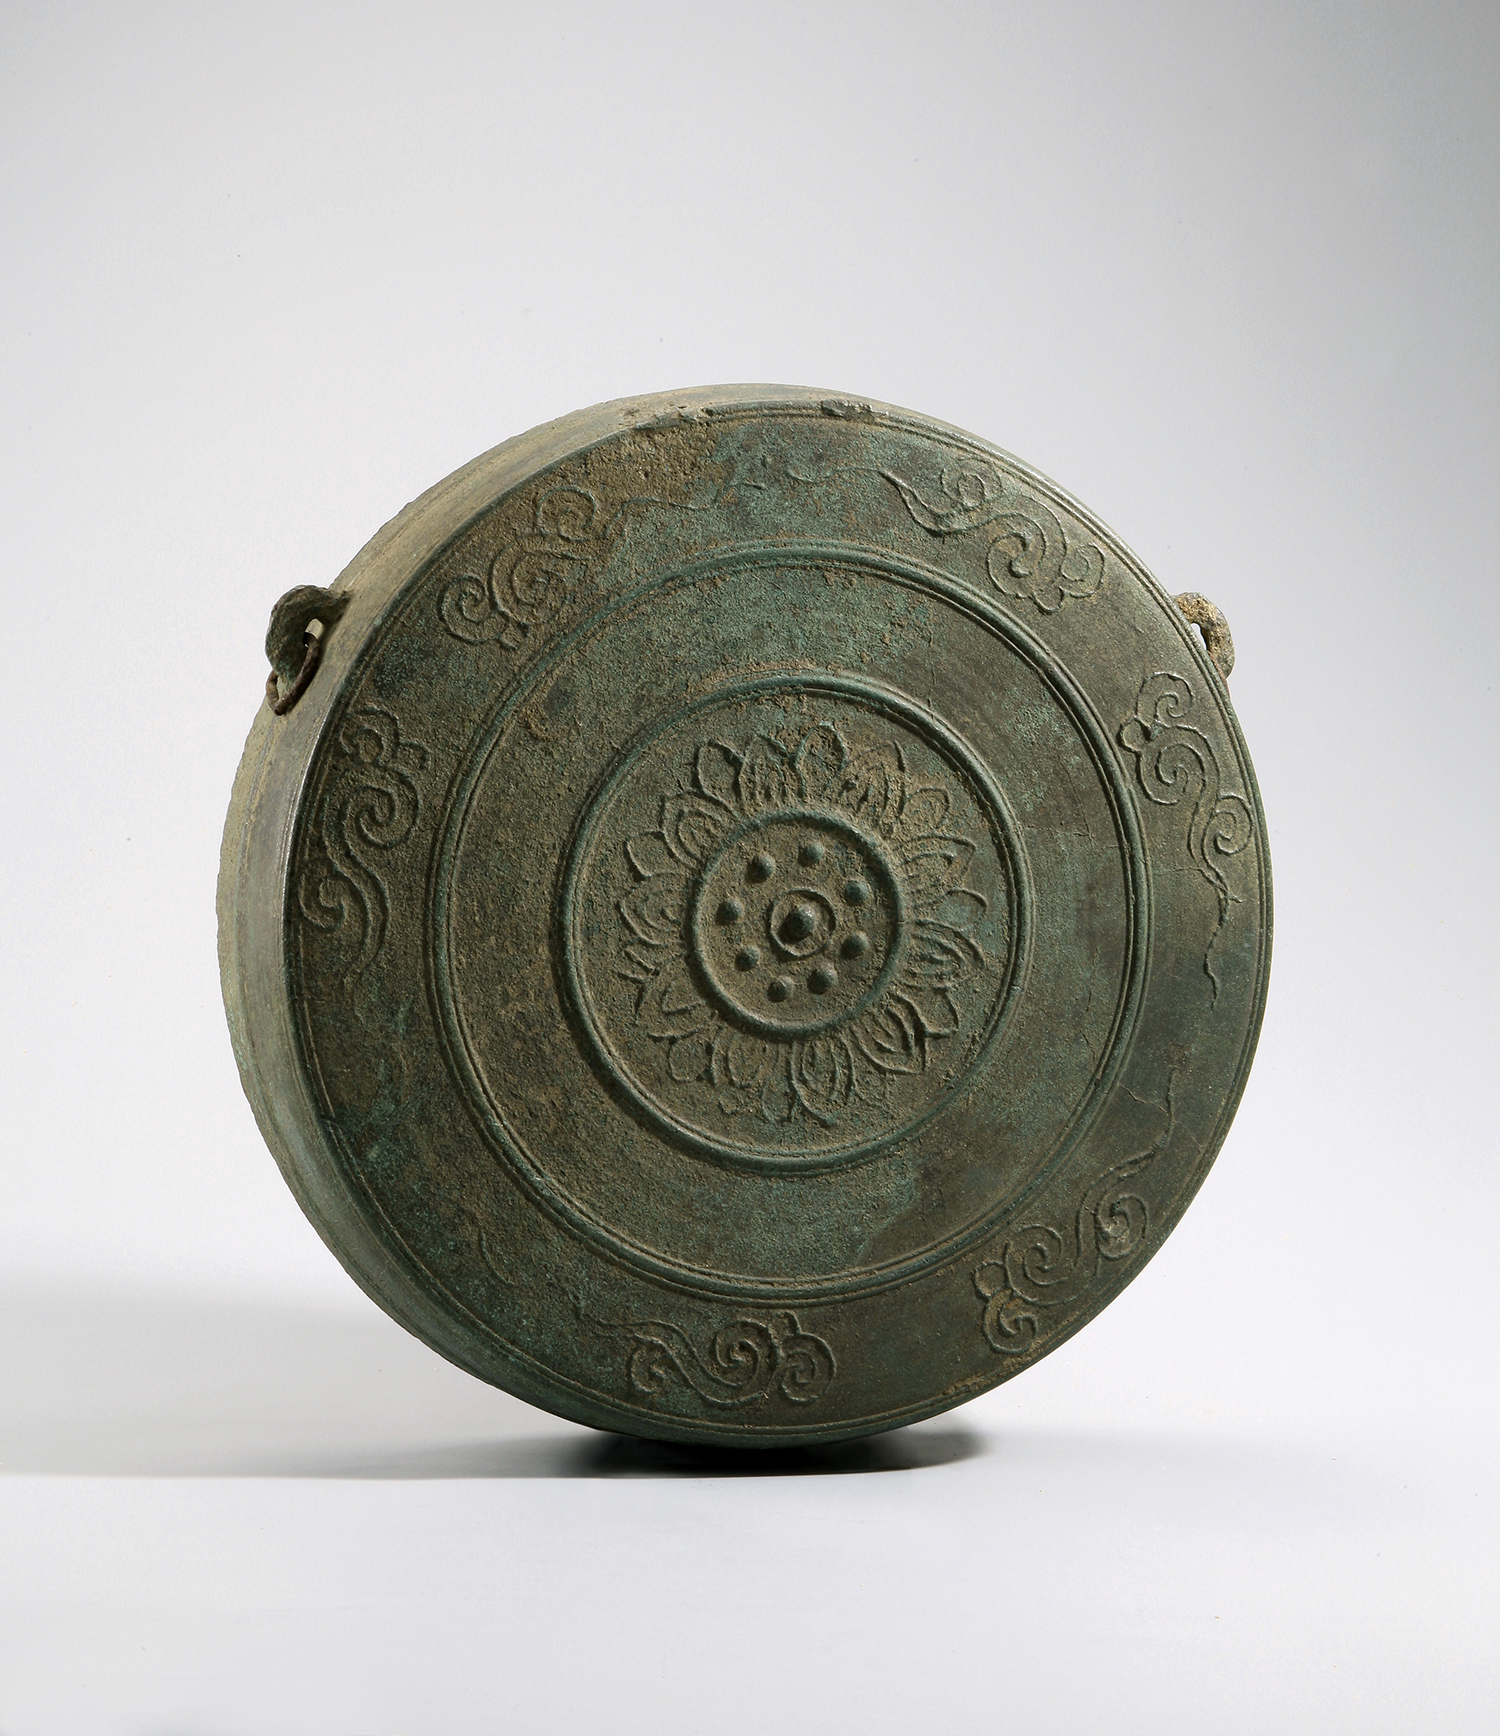 Buddhist Gong with the Inscription of "the 2nd Year of Taewha" and "Pogyesa"